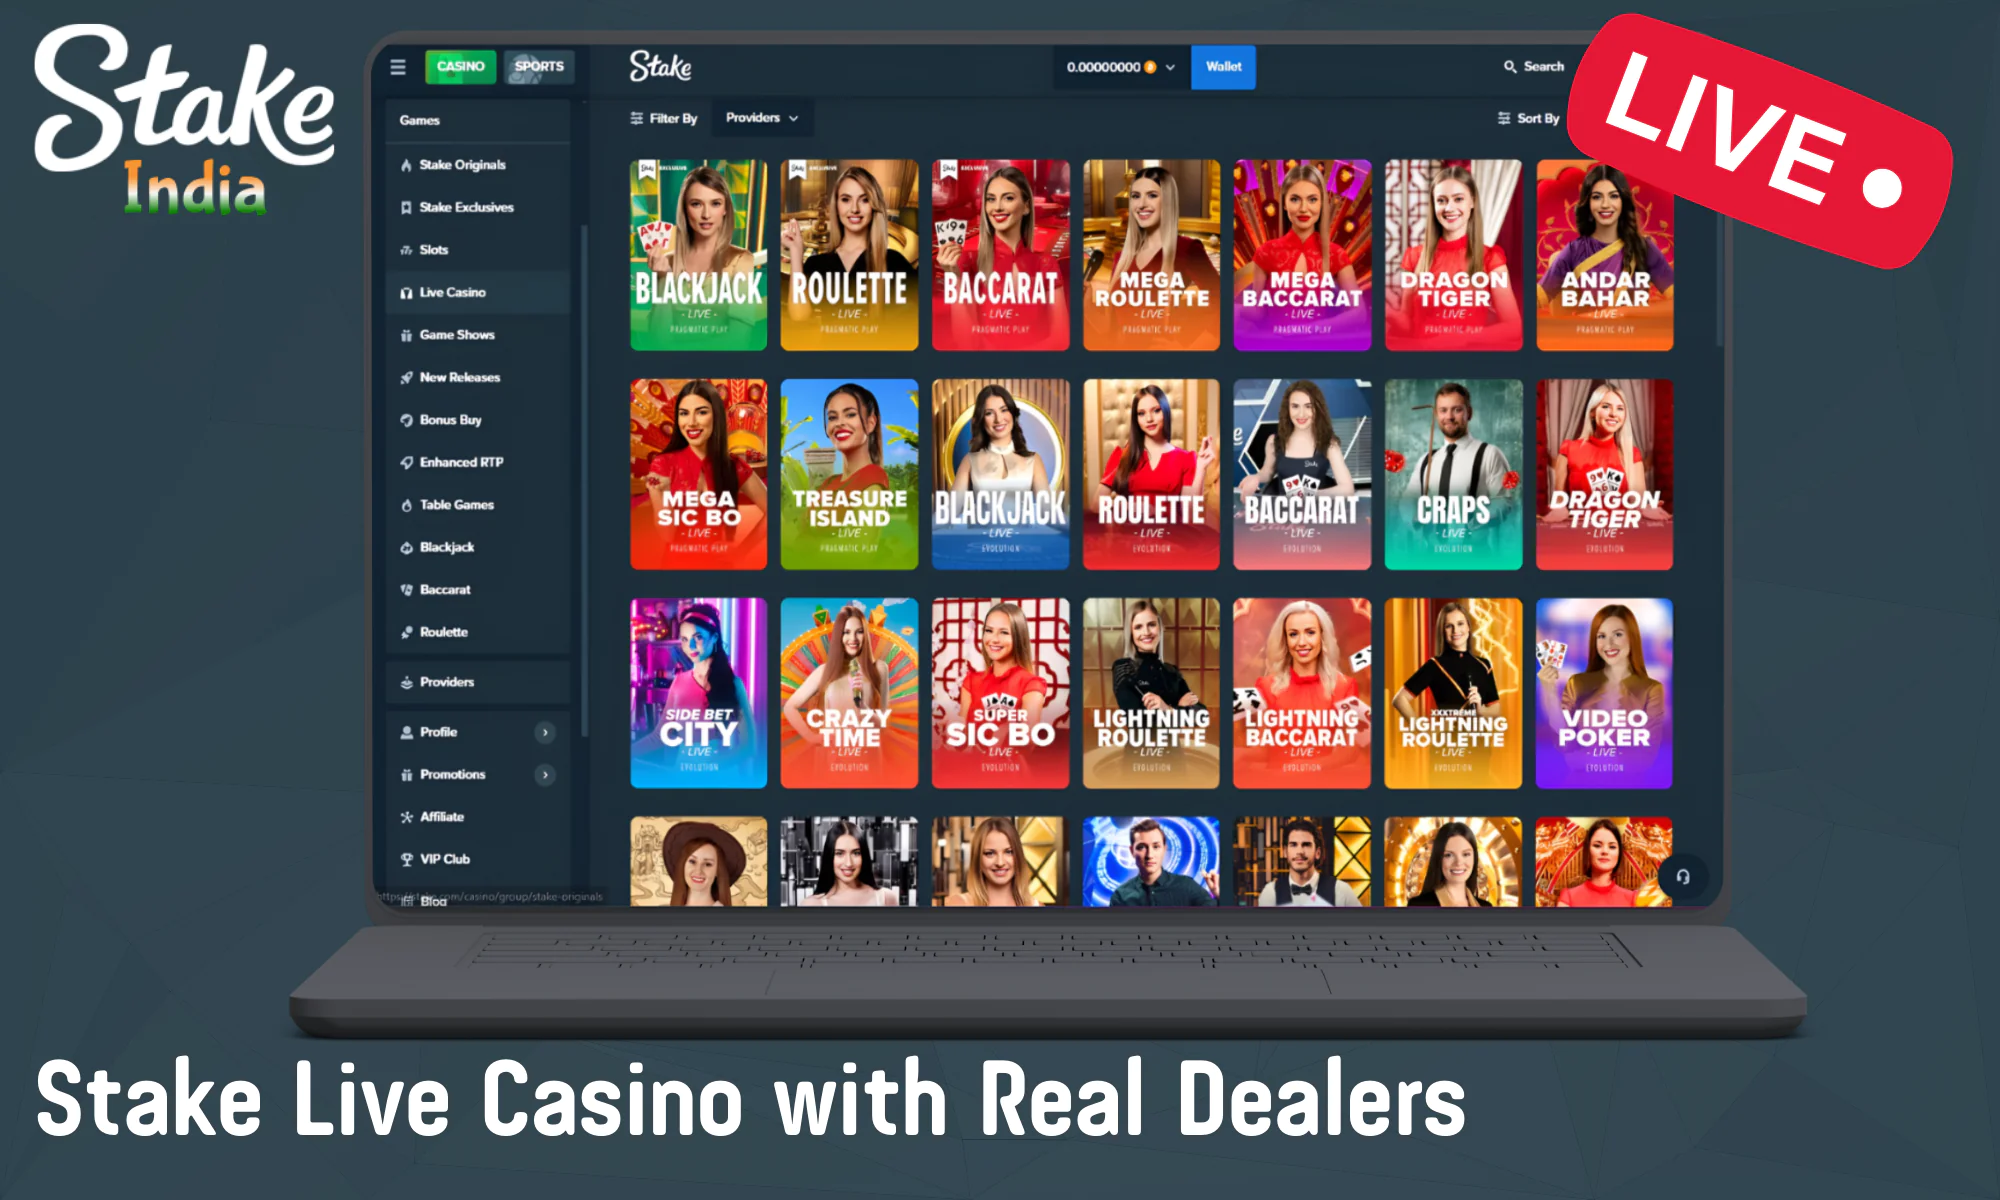 Stake India offers access to 60 different online games with live dealers